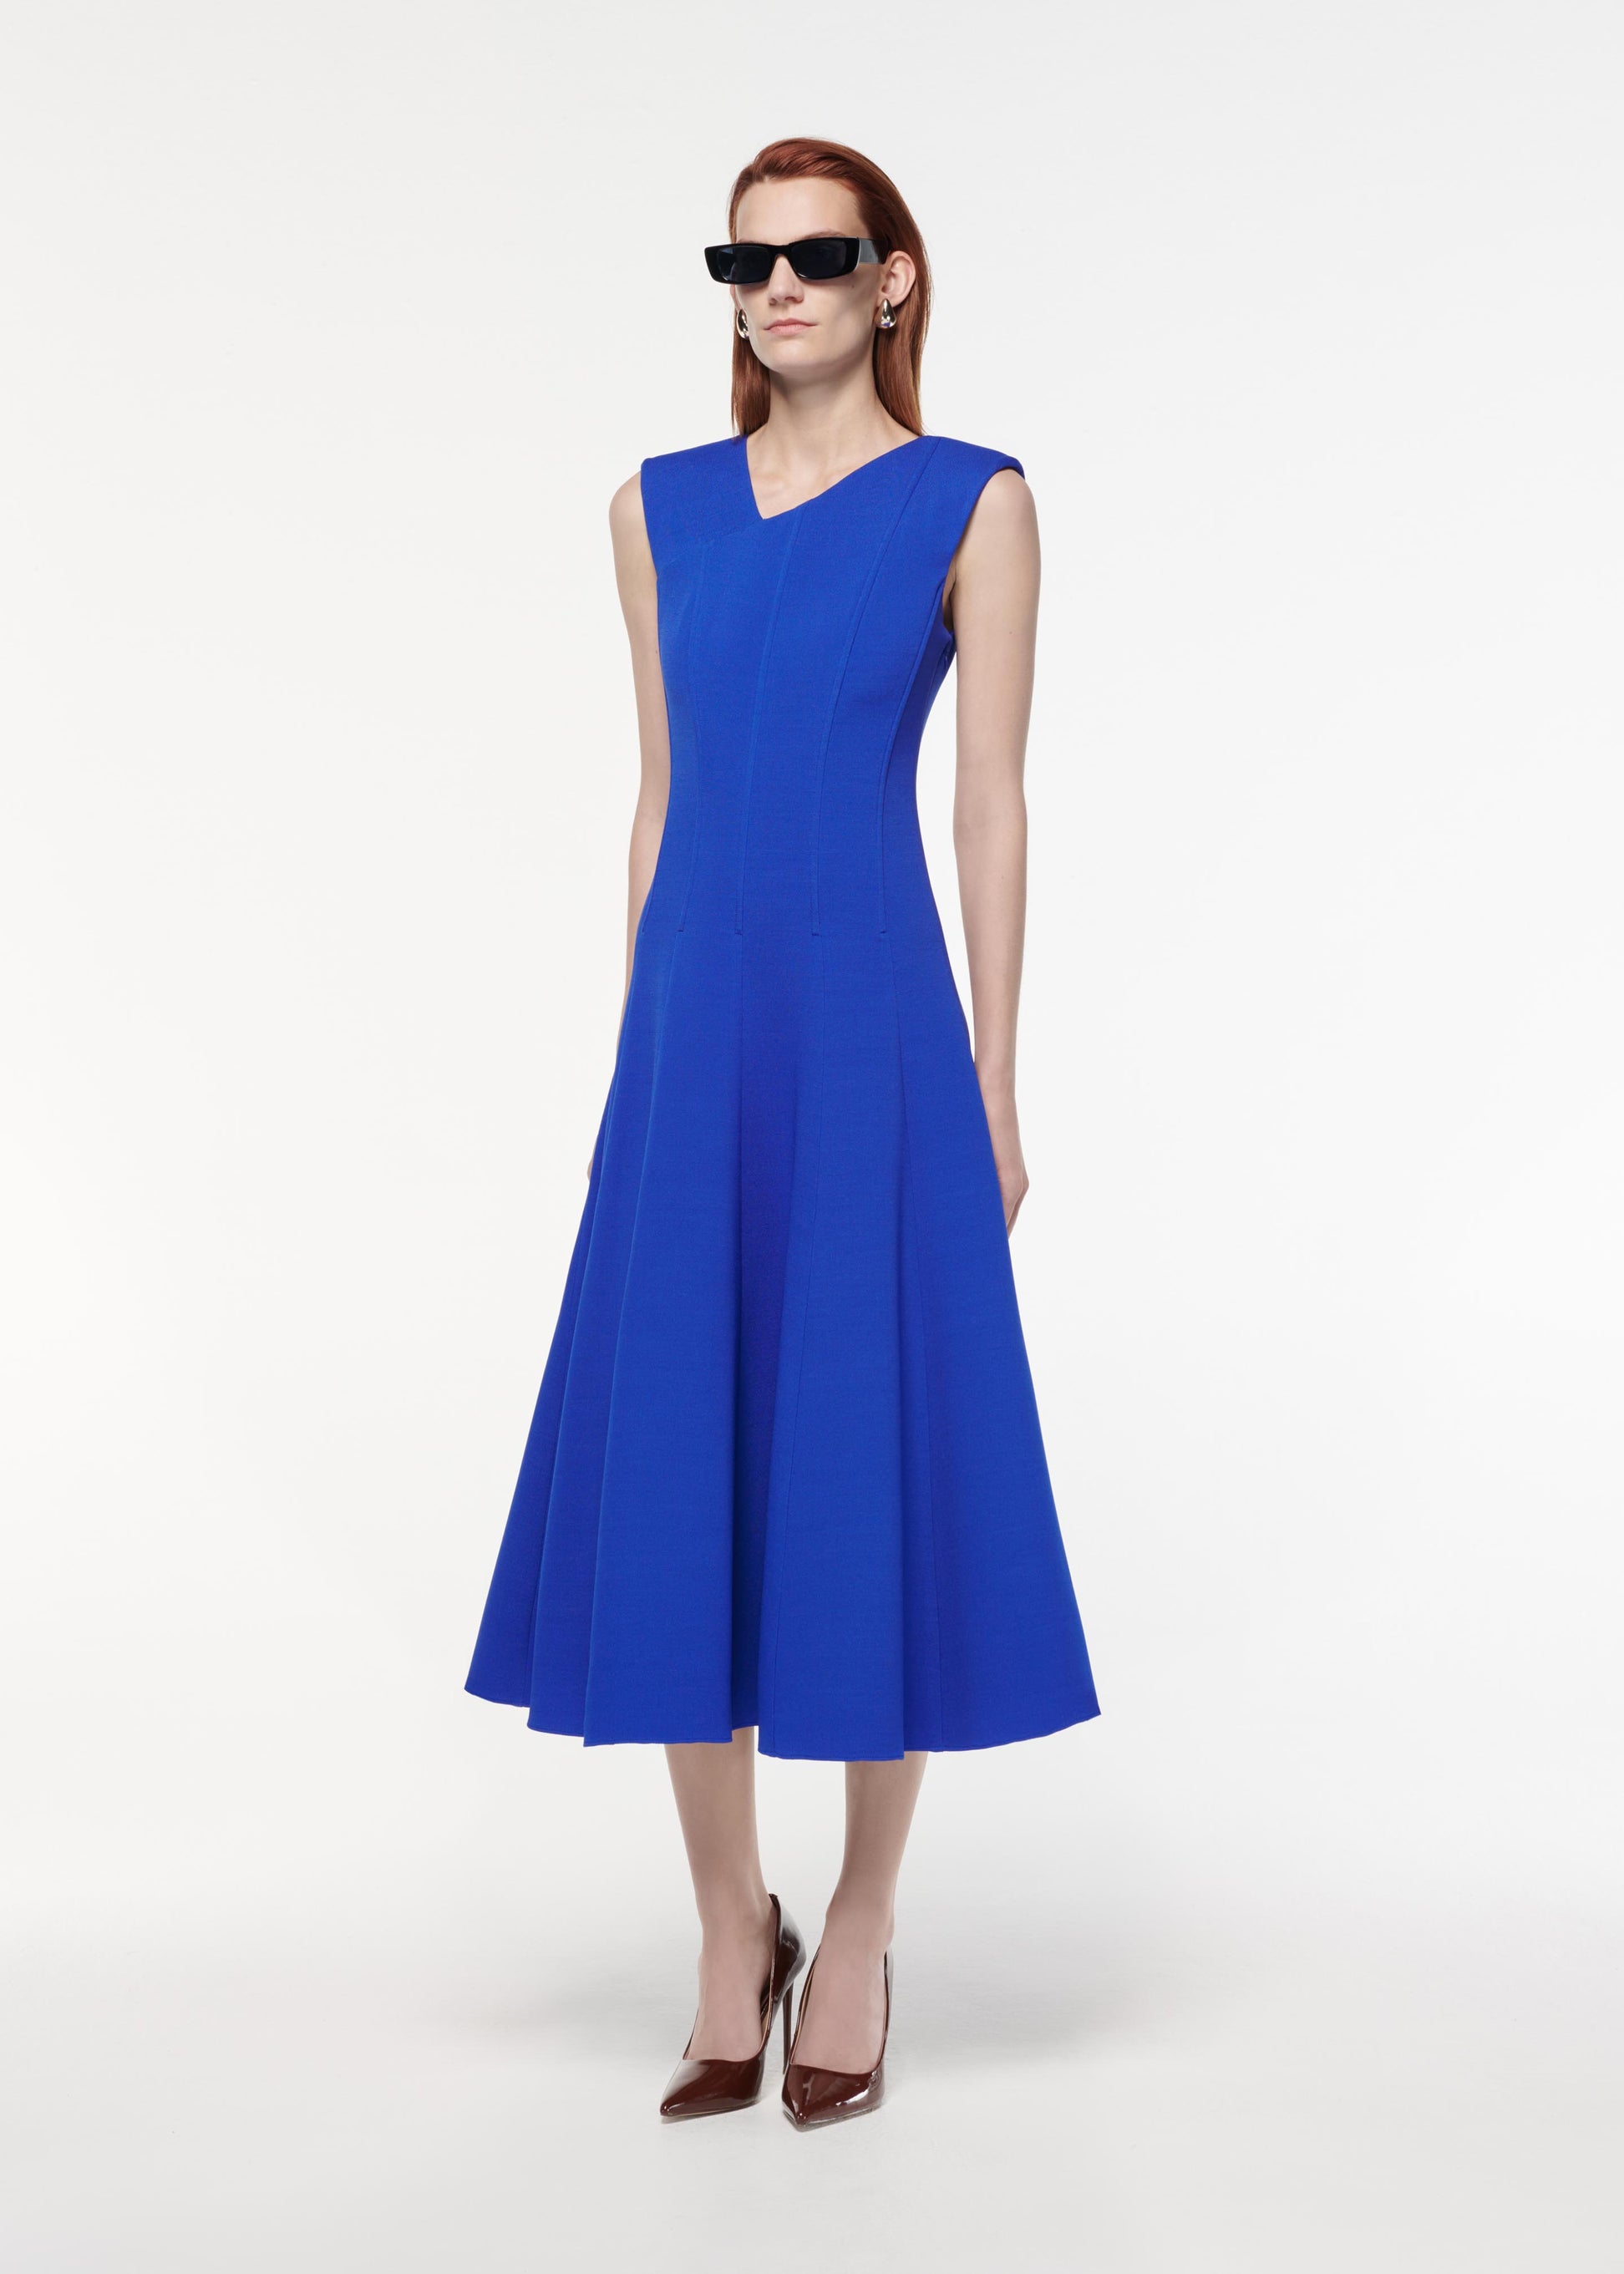 A photograph of a woman wearing a Stretch Wool Silk Midi Dress in Blue